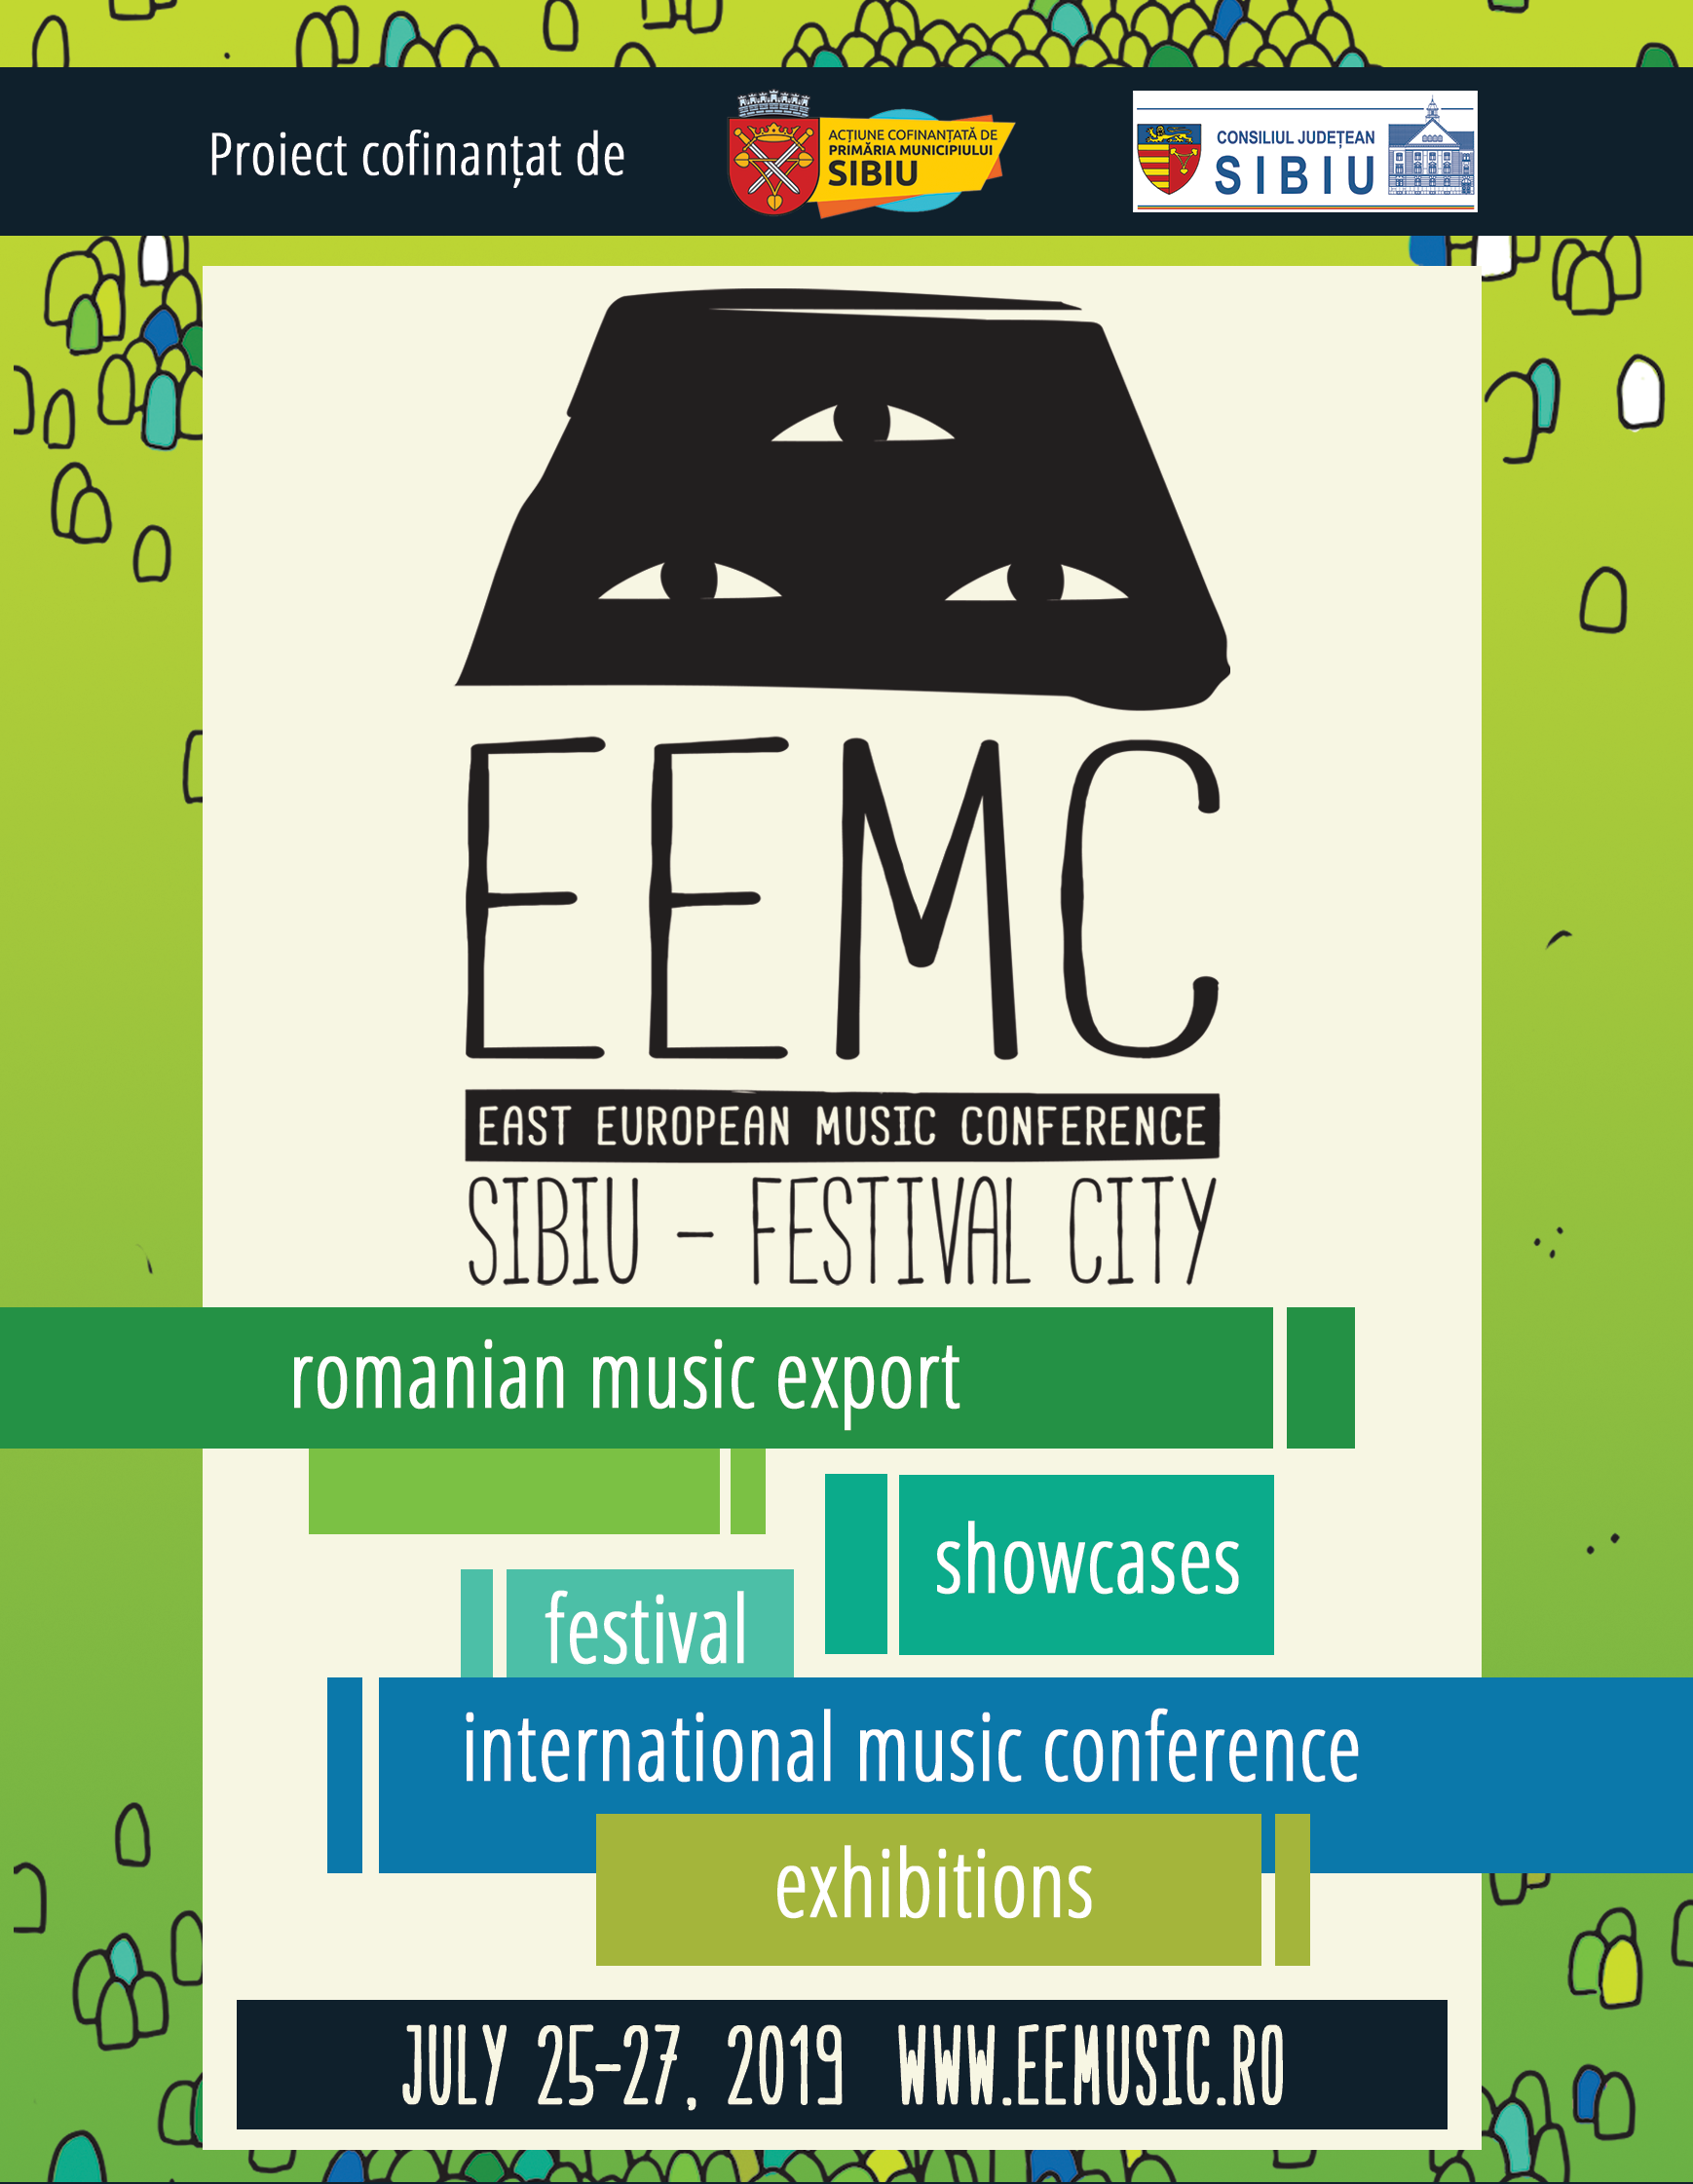 East European Music Conference 2019 starts